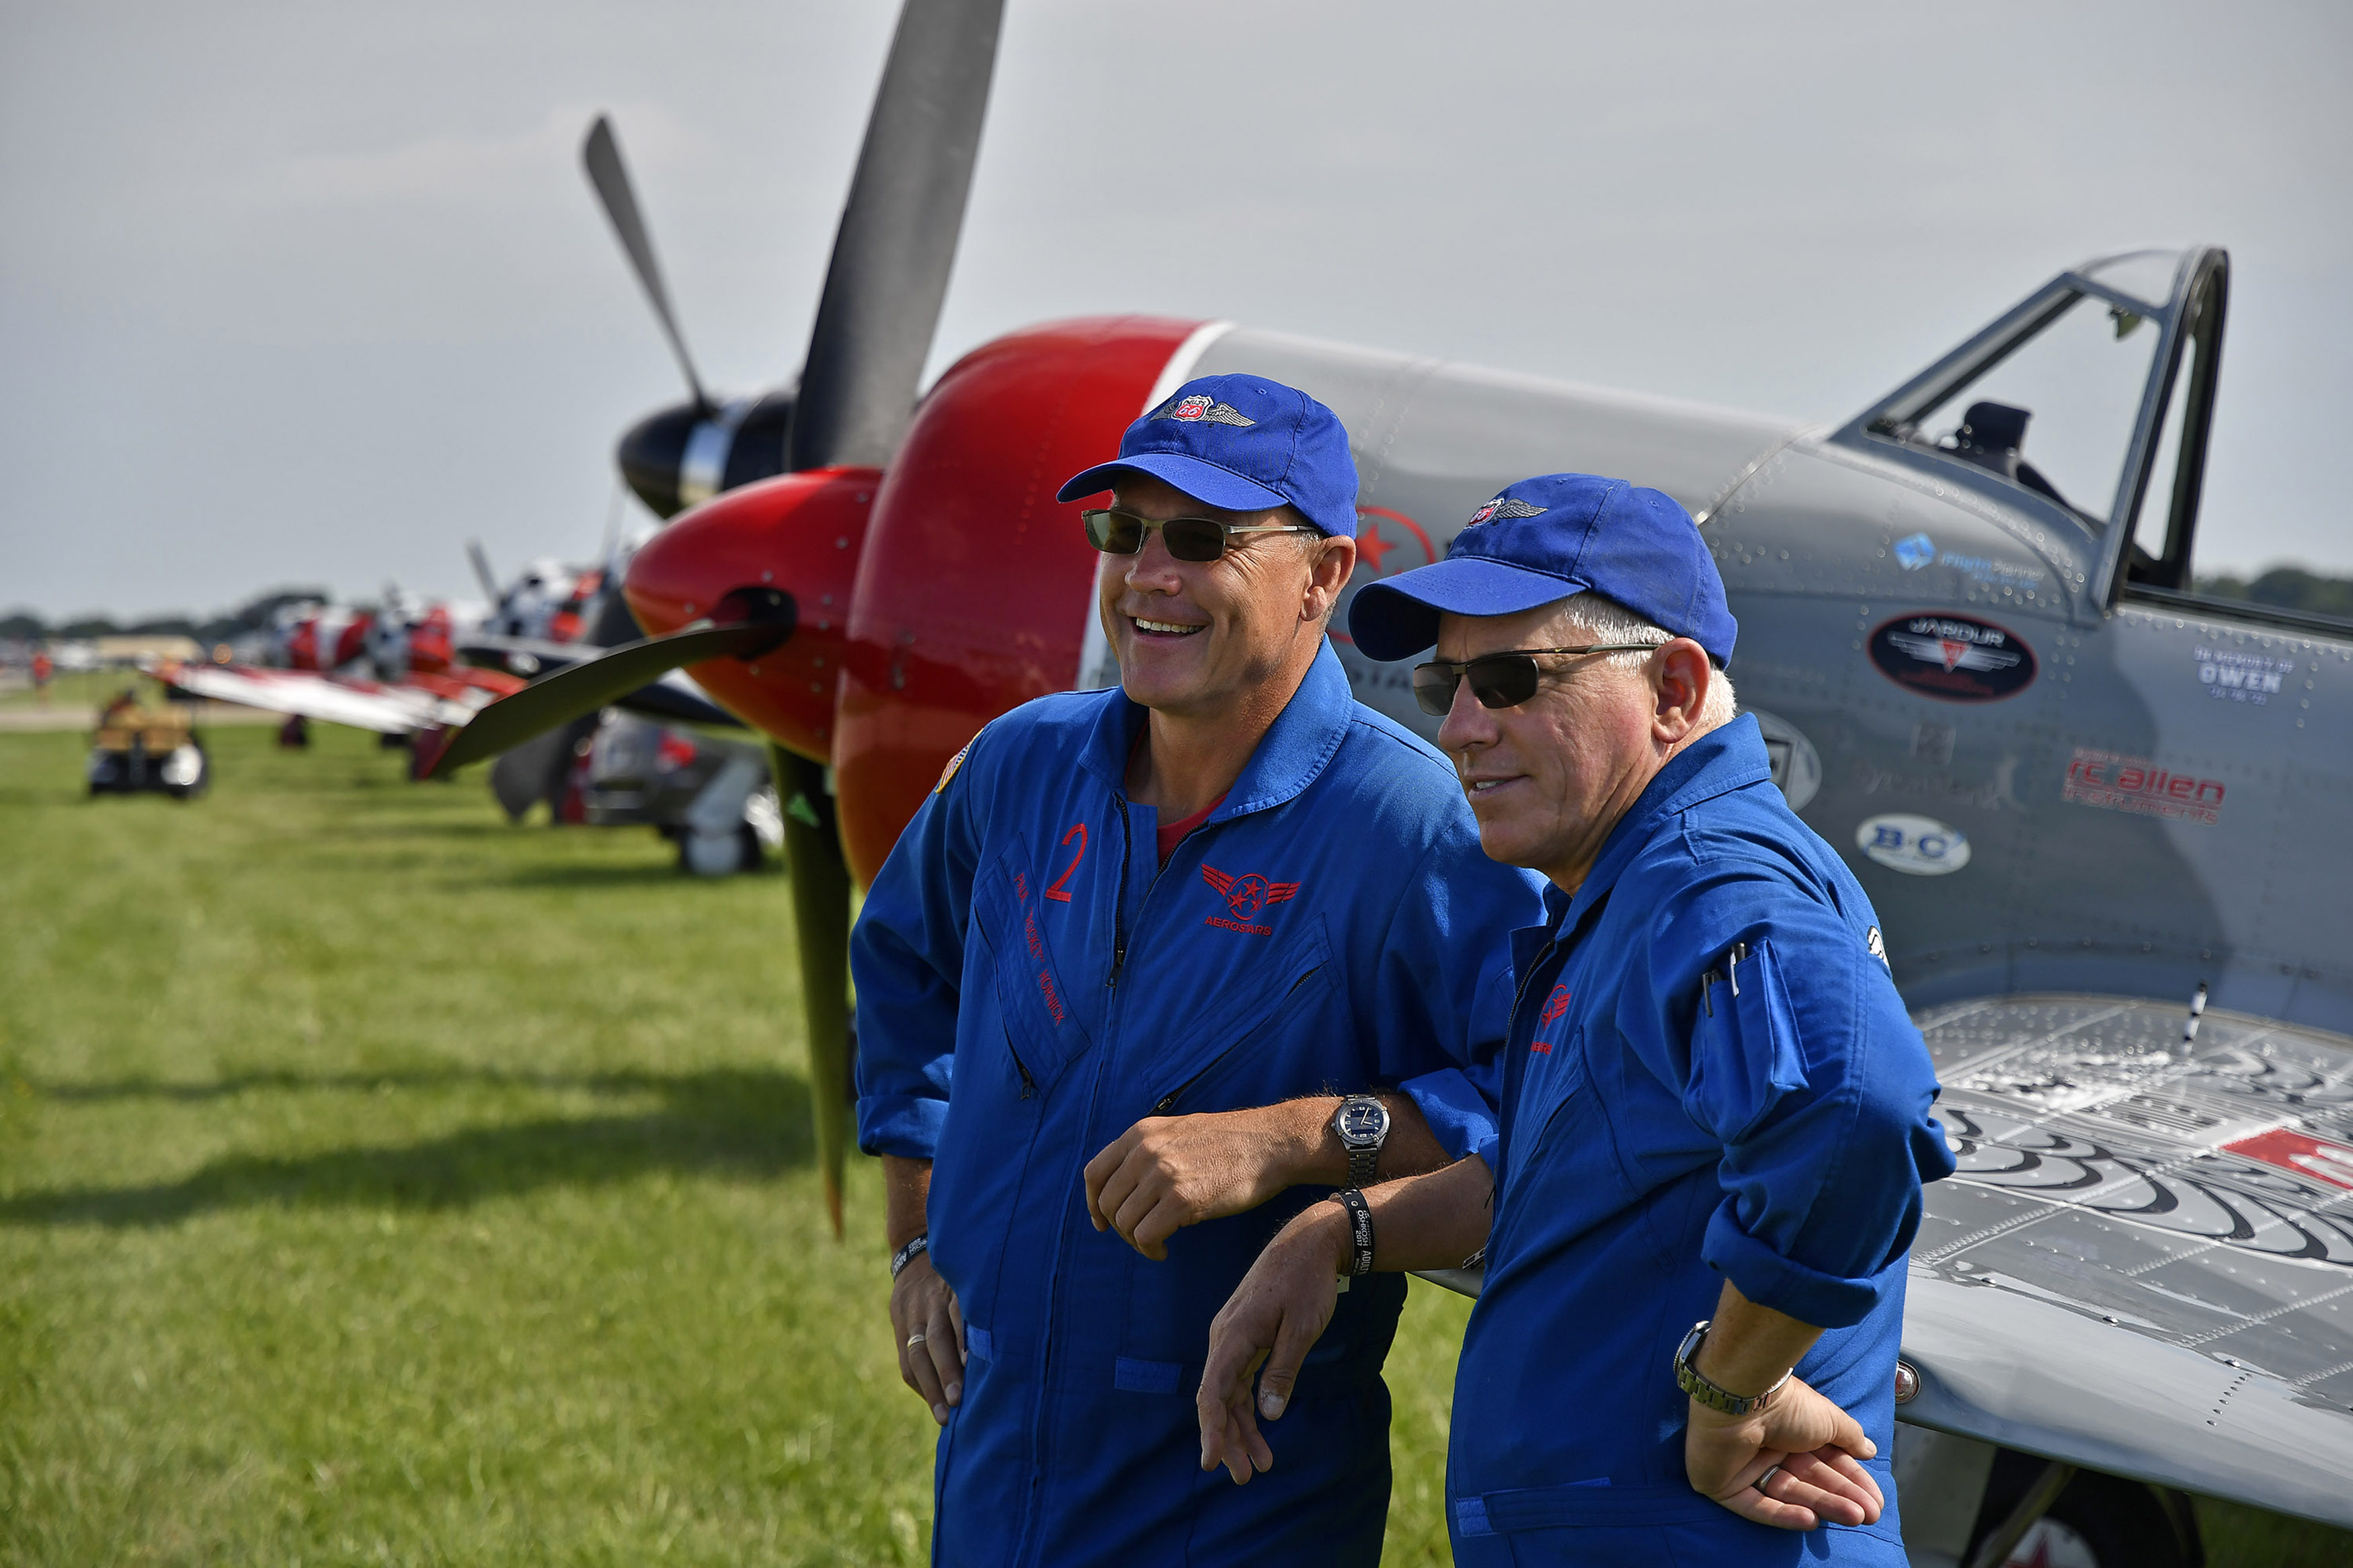 Phillips 66 Aerostars teammates Paul 'Rocket' Hornick and Dave 'Cupid' Monroe smile from the flight line during EAA AirVenture in Oshkosh, Wisconsin. The pilots begin training for the summer air show season in January. Photo by David Tulis.